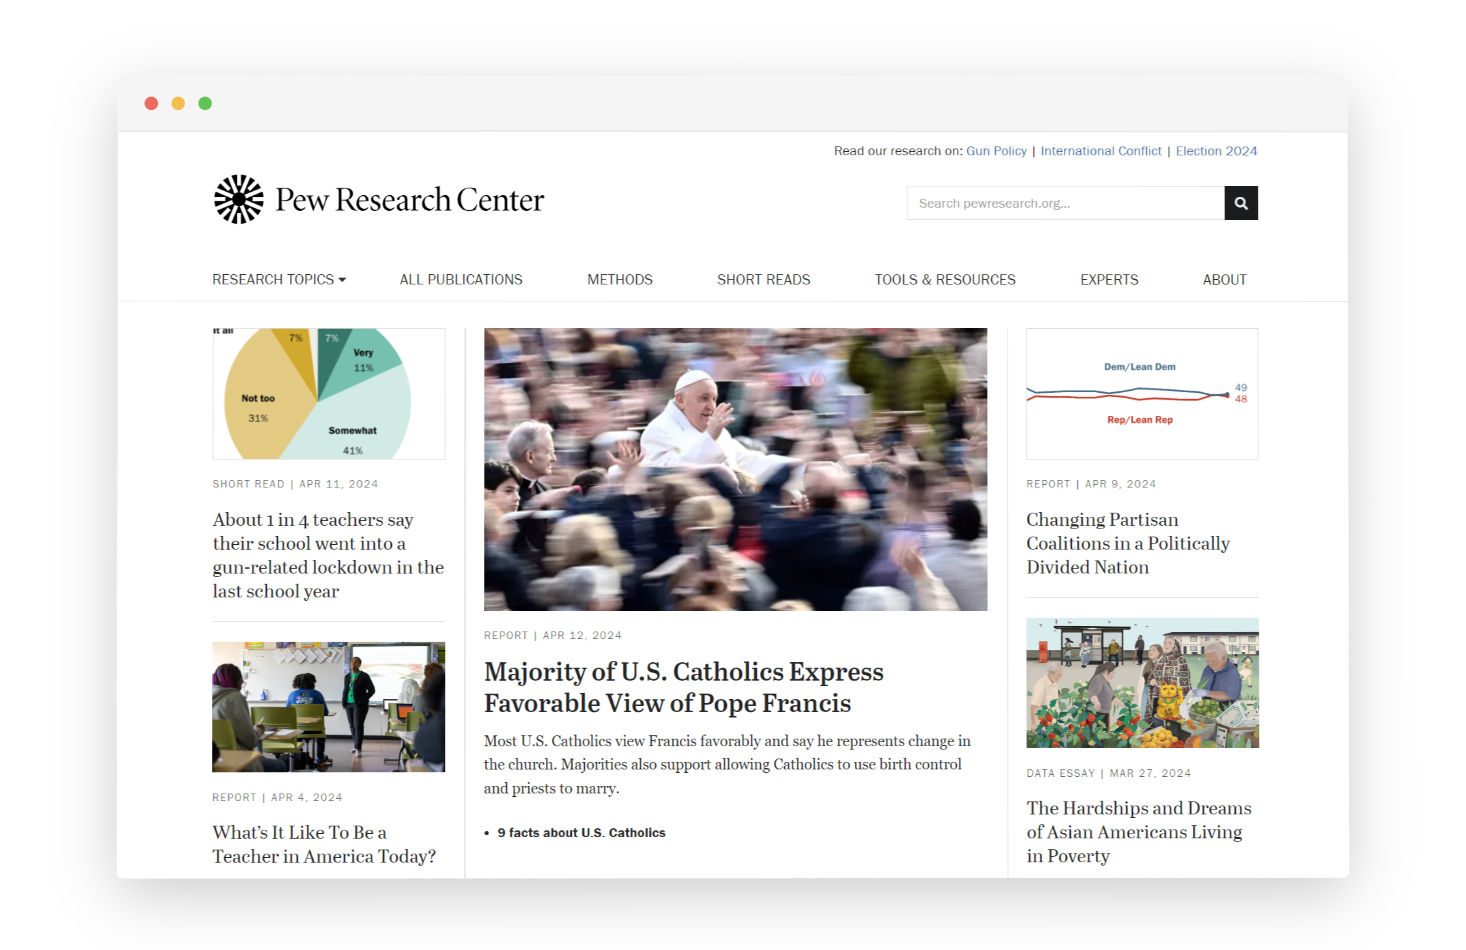 Market research tools - Pew Research center